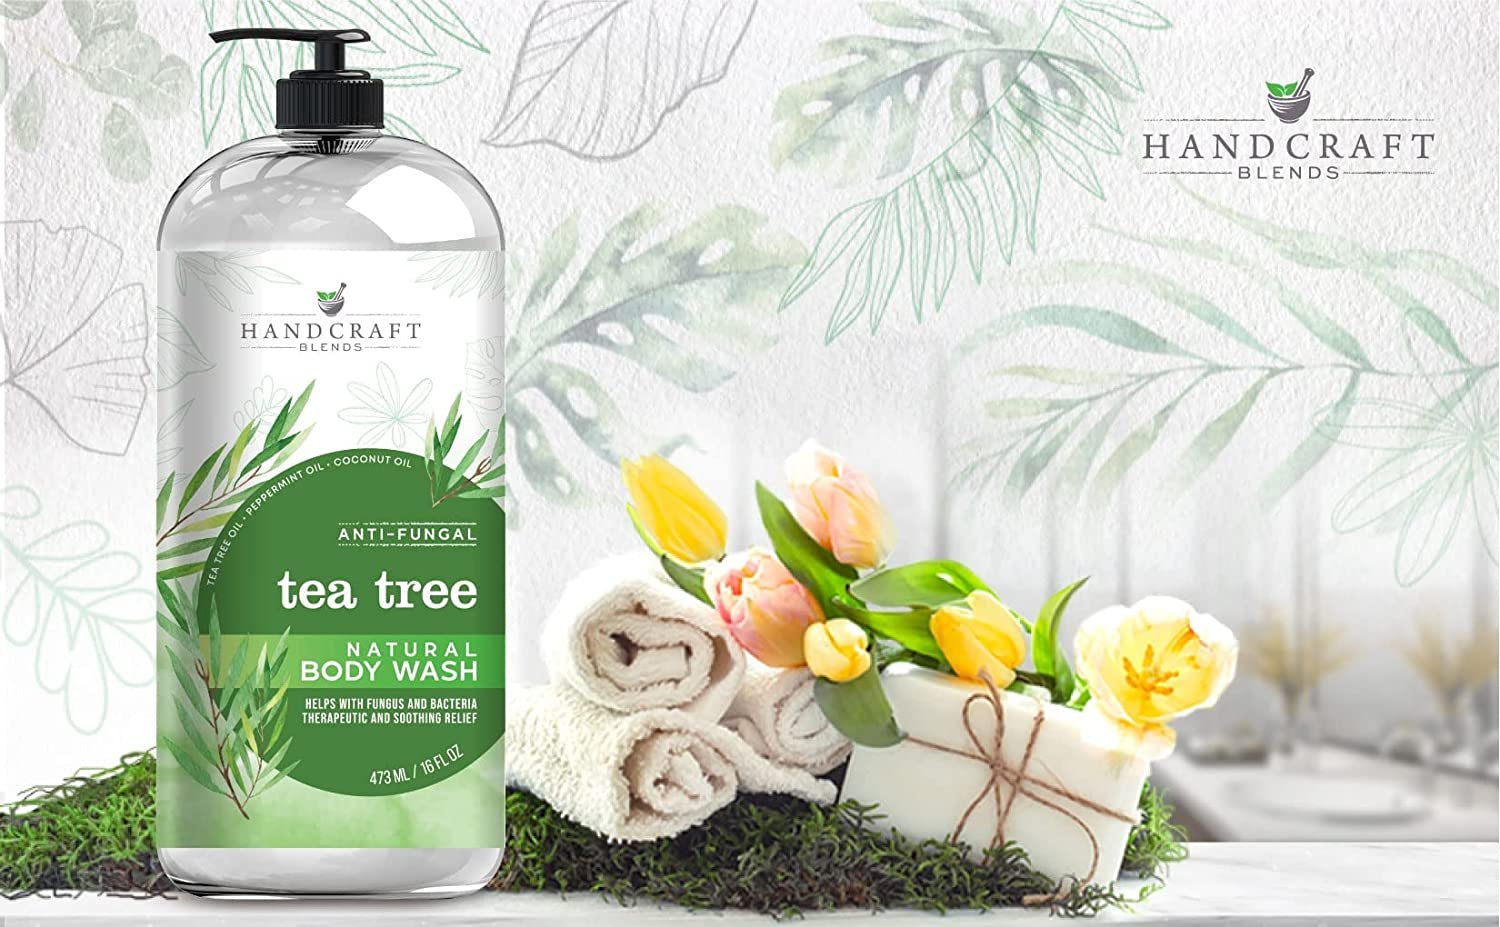 Handcraft Tea Tree Oil Body Wash 16 Oz - Extra Strength Body Wash for Athletes Foot, Nail Fungus, Itchy Skin, Jock Itch, Acne and Eczema - Tea Tree Body Wash for Men & Women